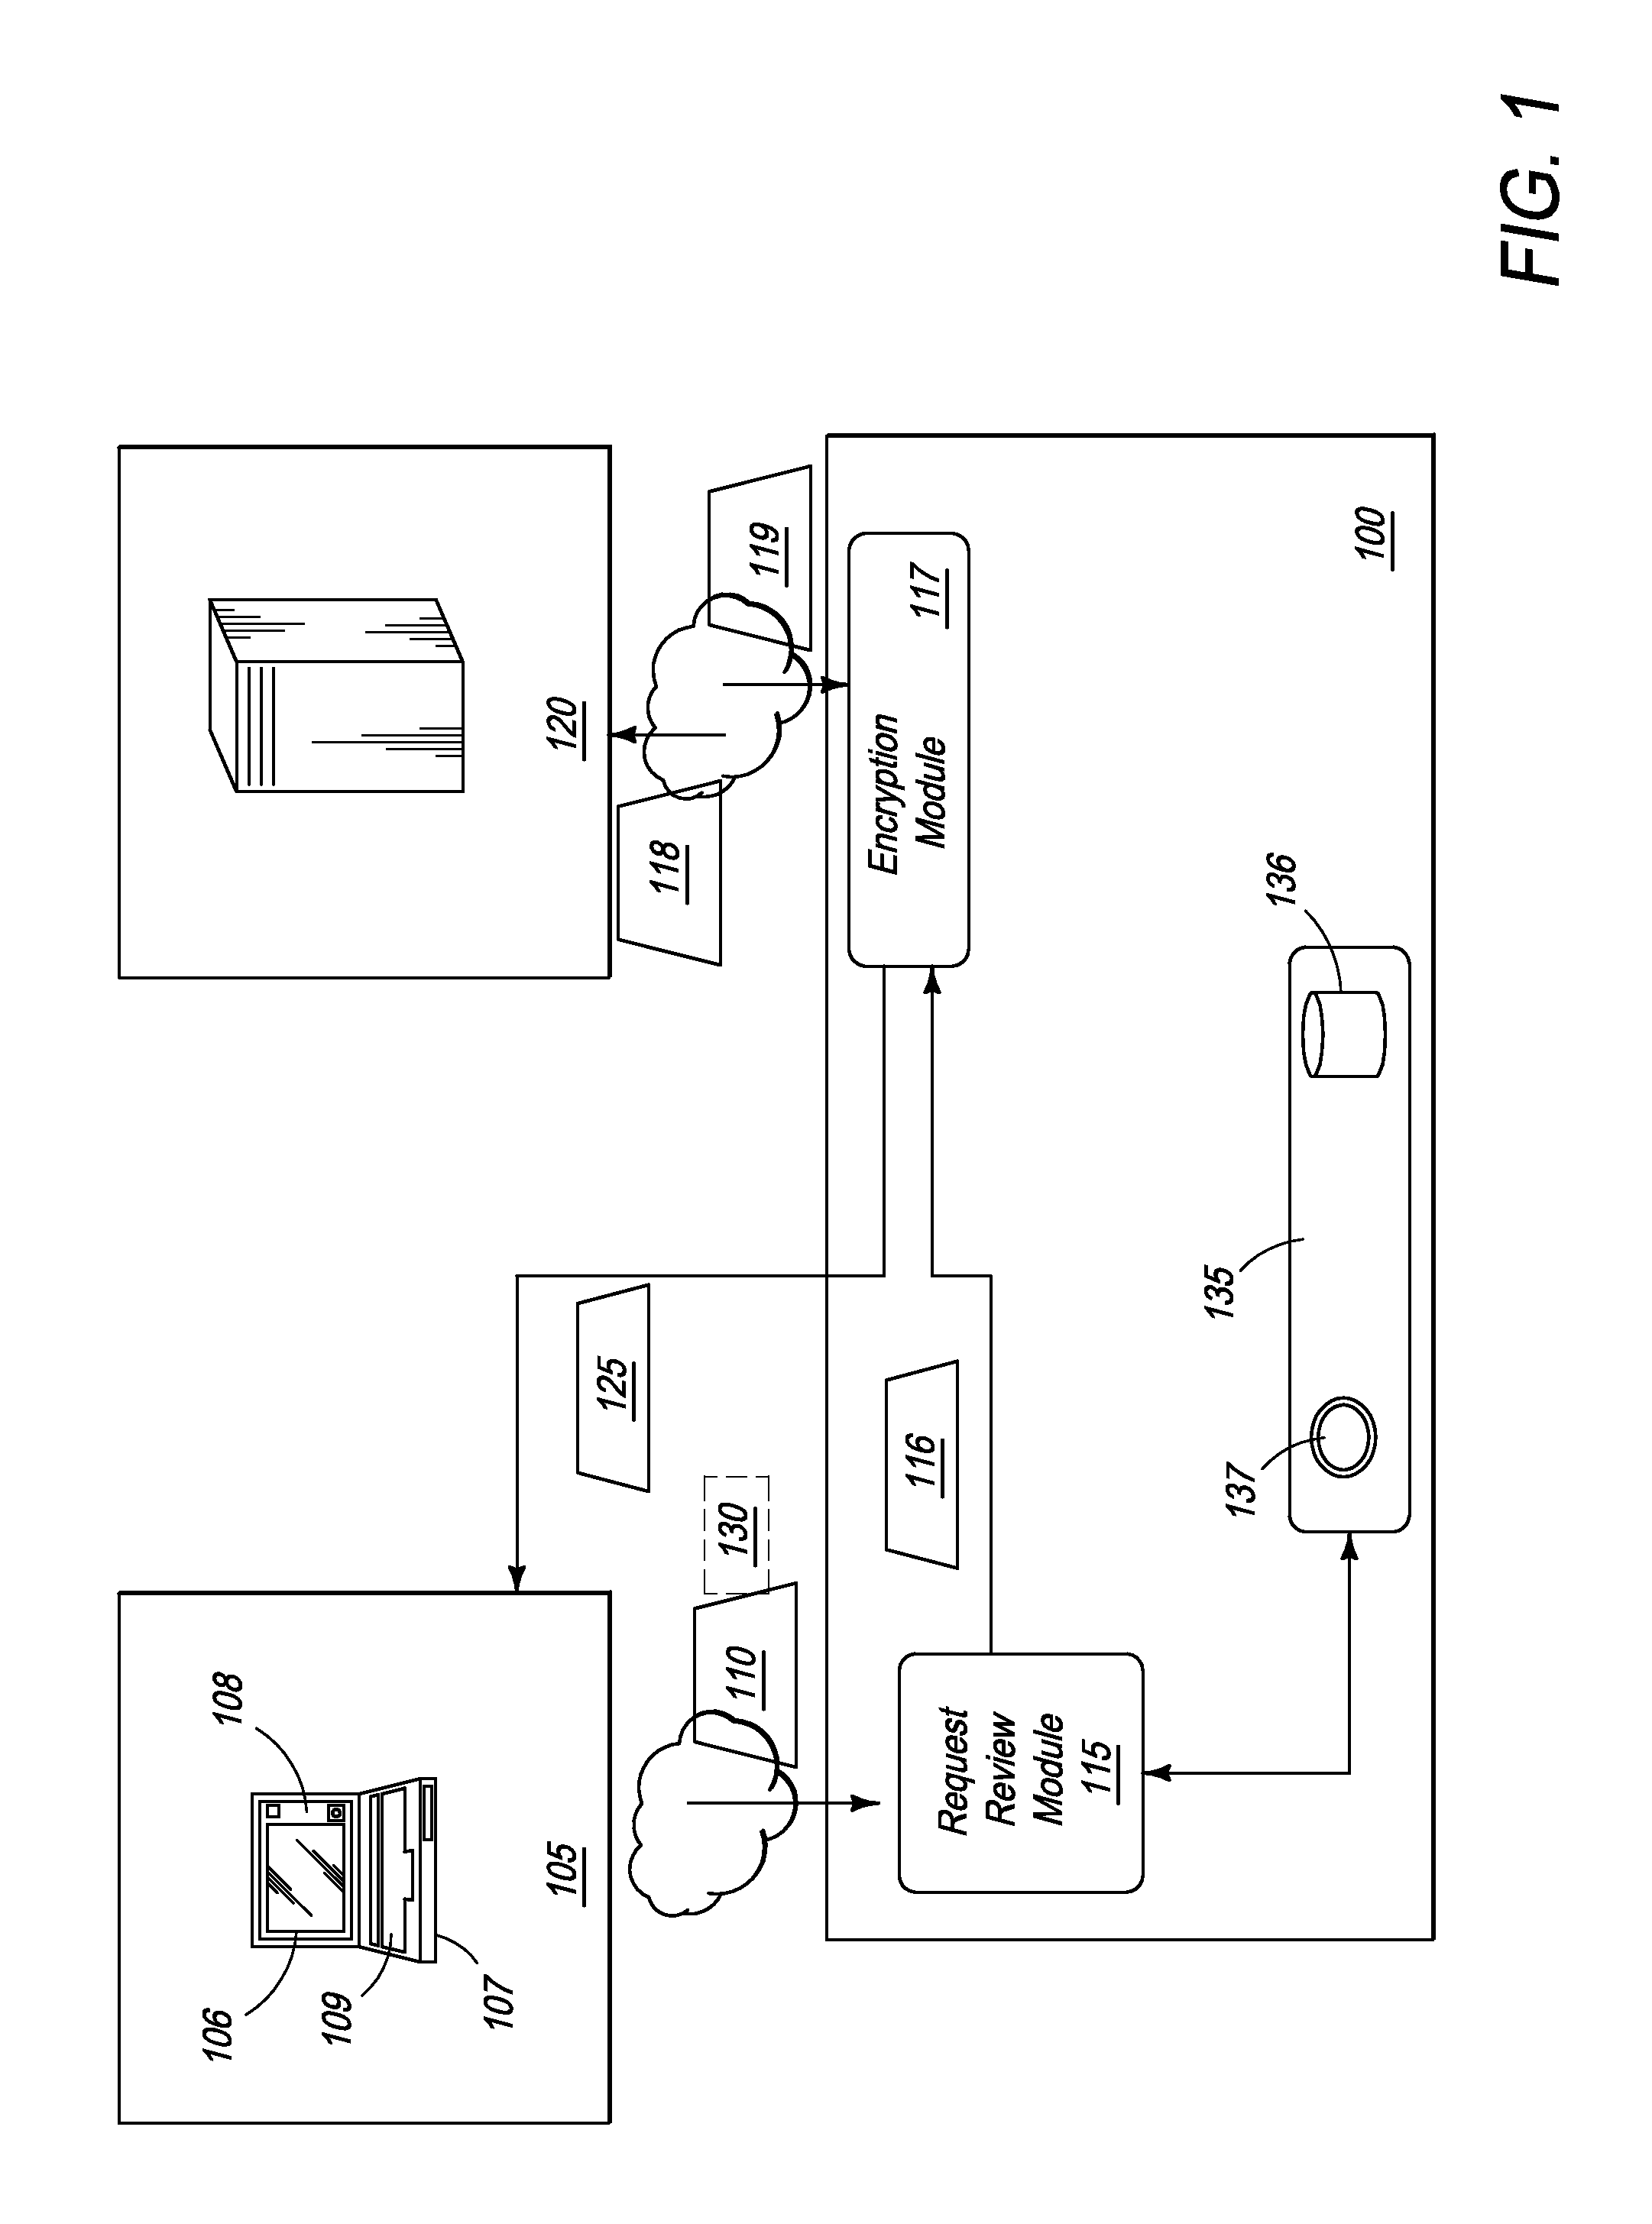 Systems and Methods for Real-Time Verification of A Personal Identification Number